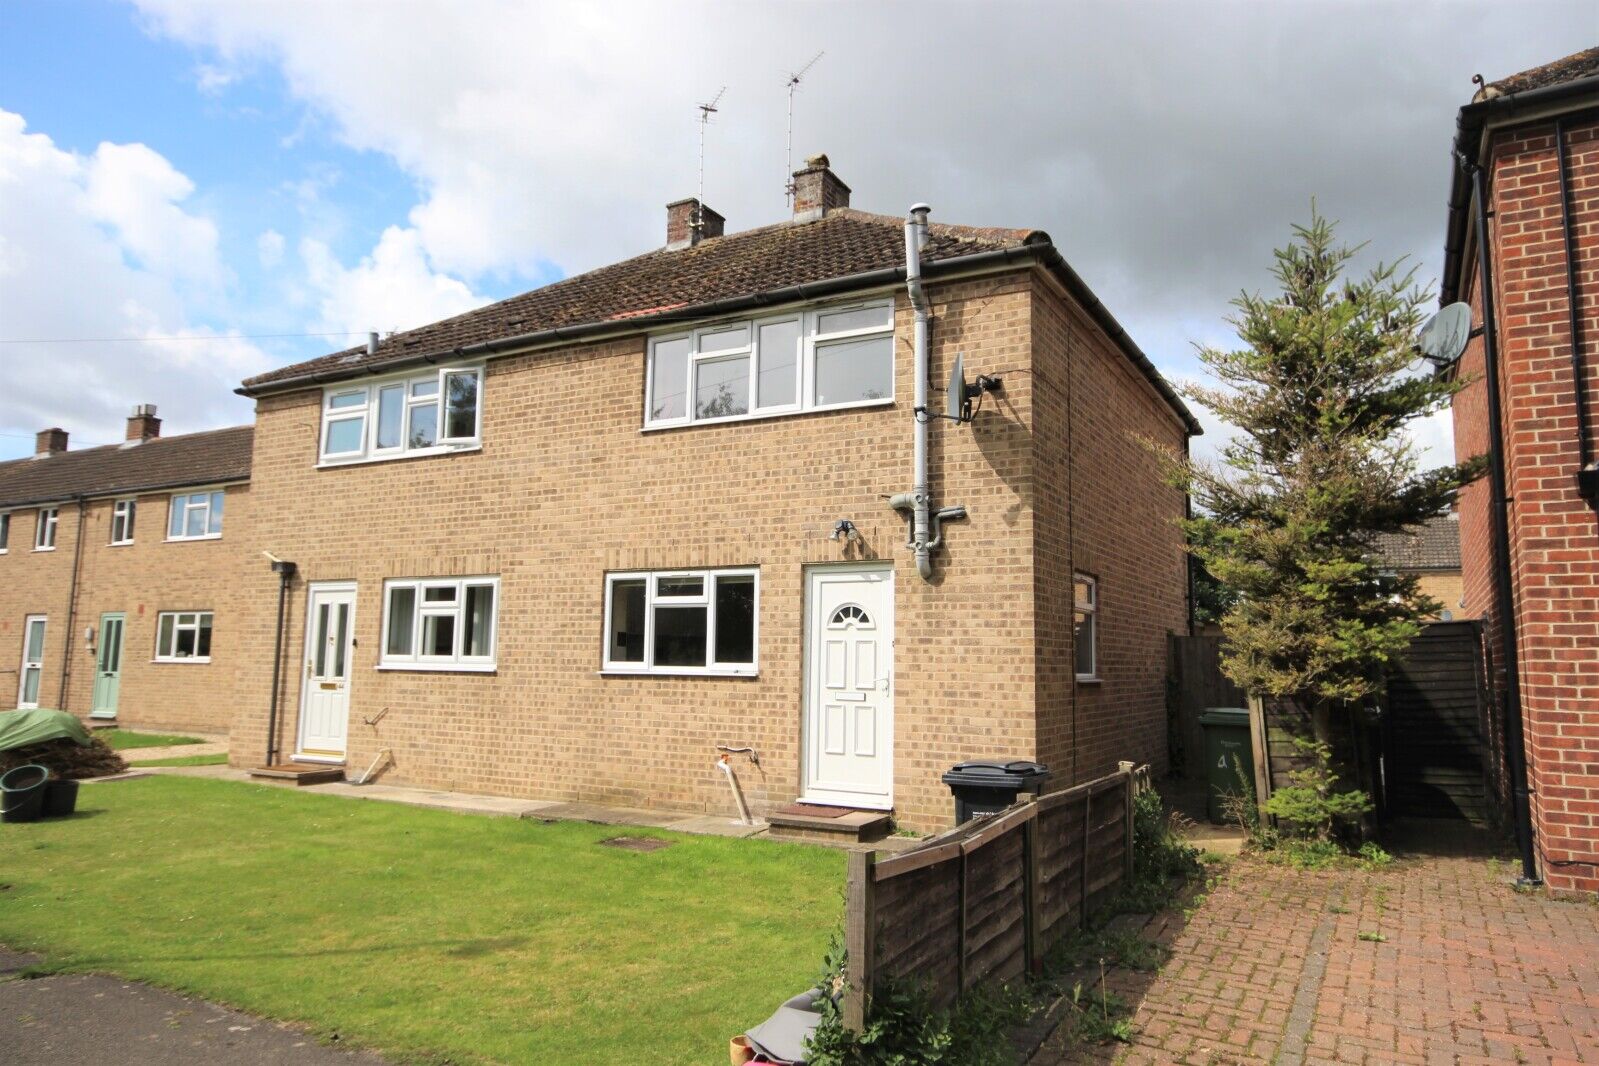 2 bedroom semi detached house for sale Appleford Drive, Abingdon-on-Thames, OX14, main image